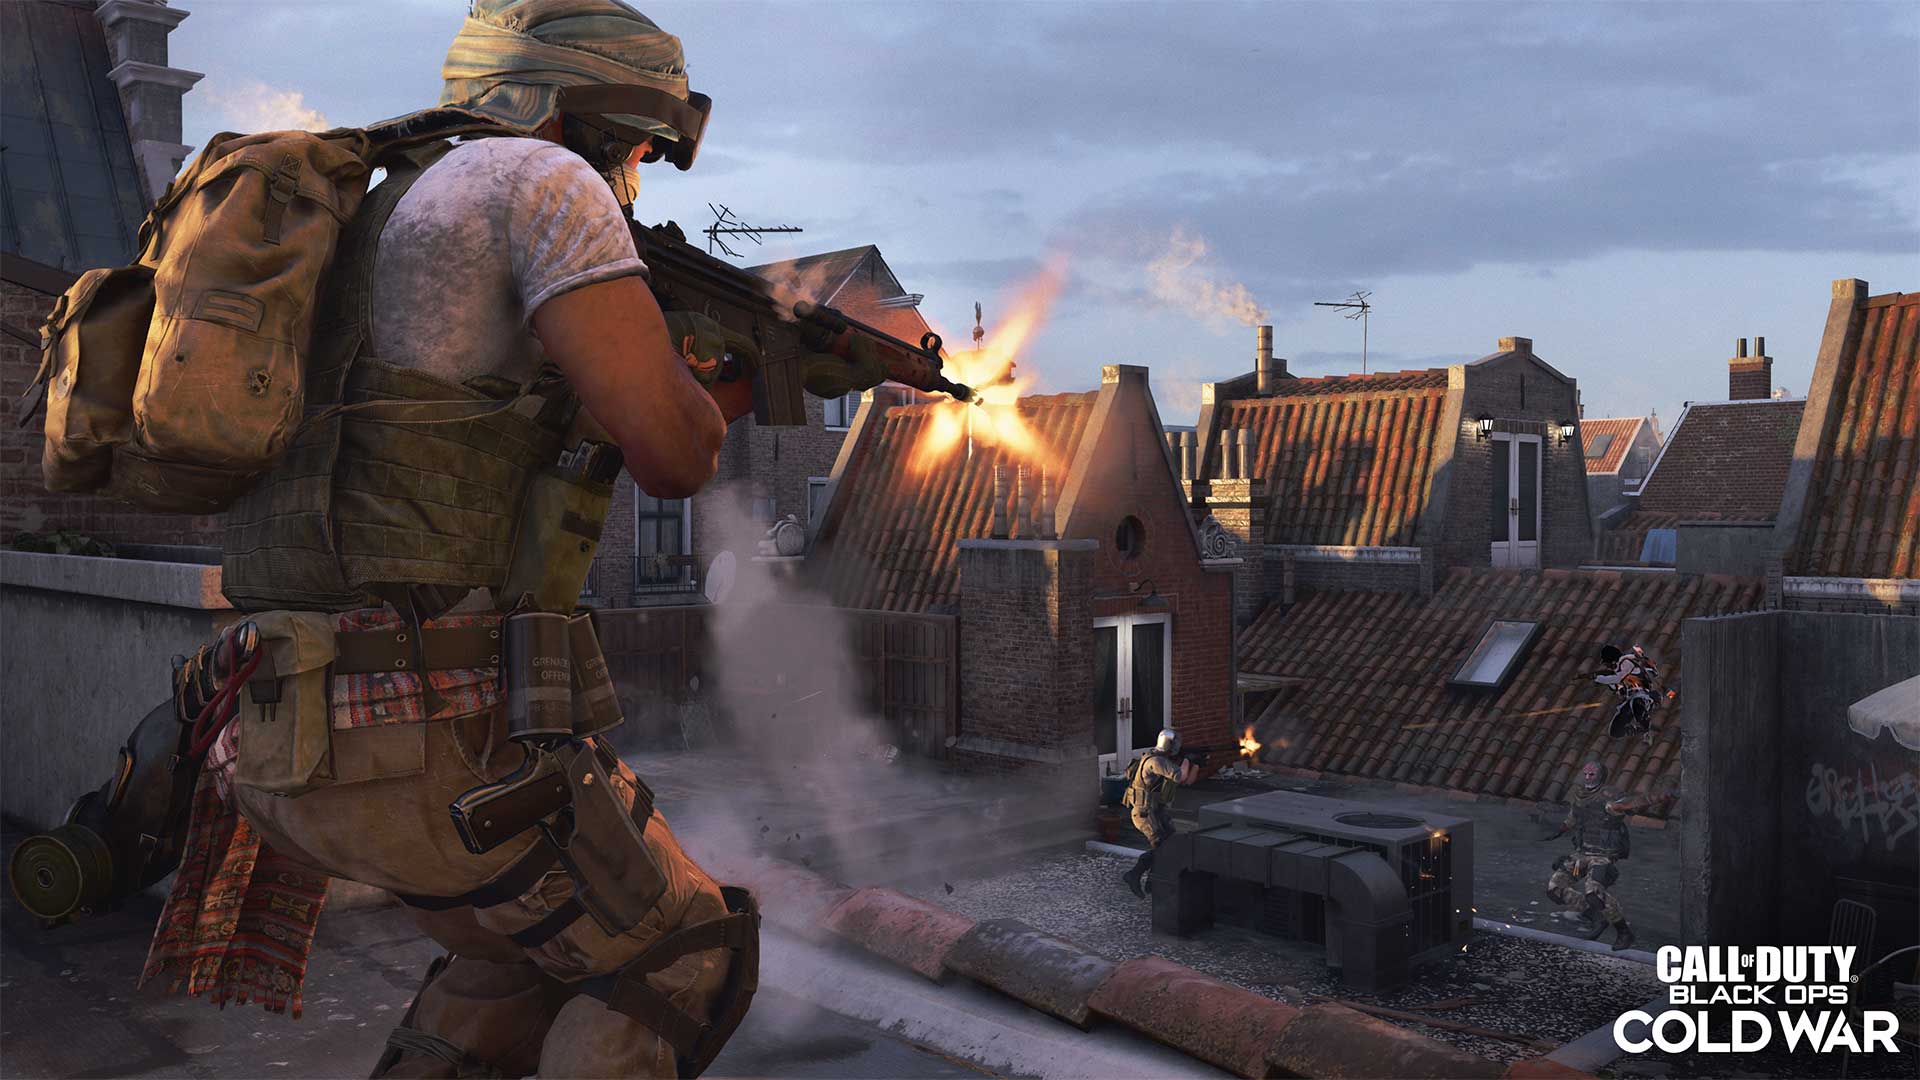 A gunfight taking place on the roofs of houses